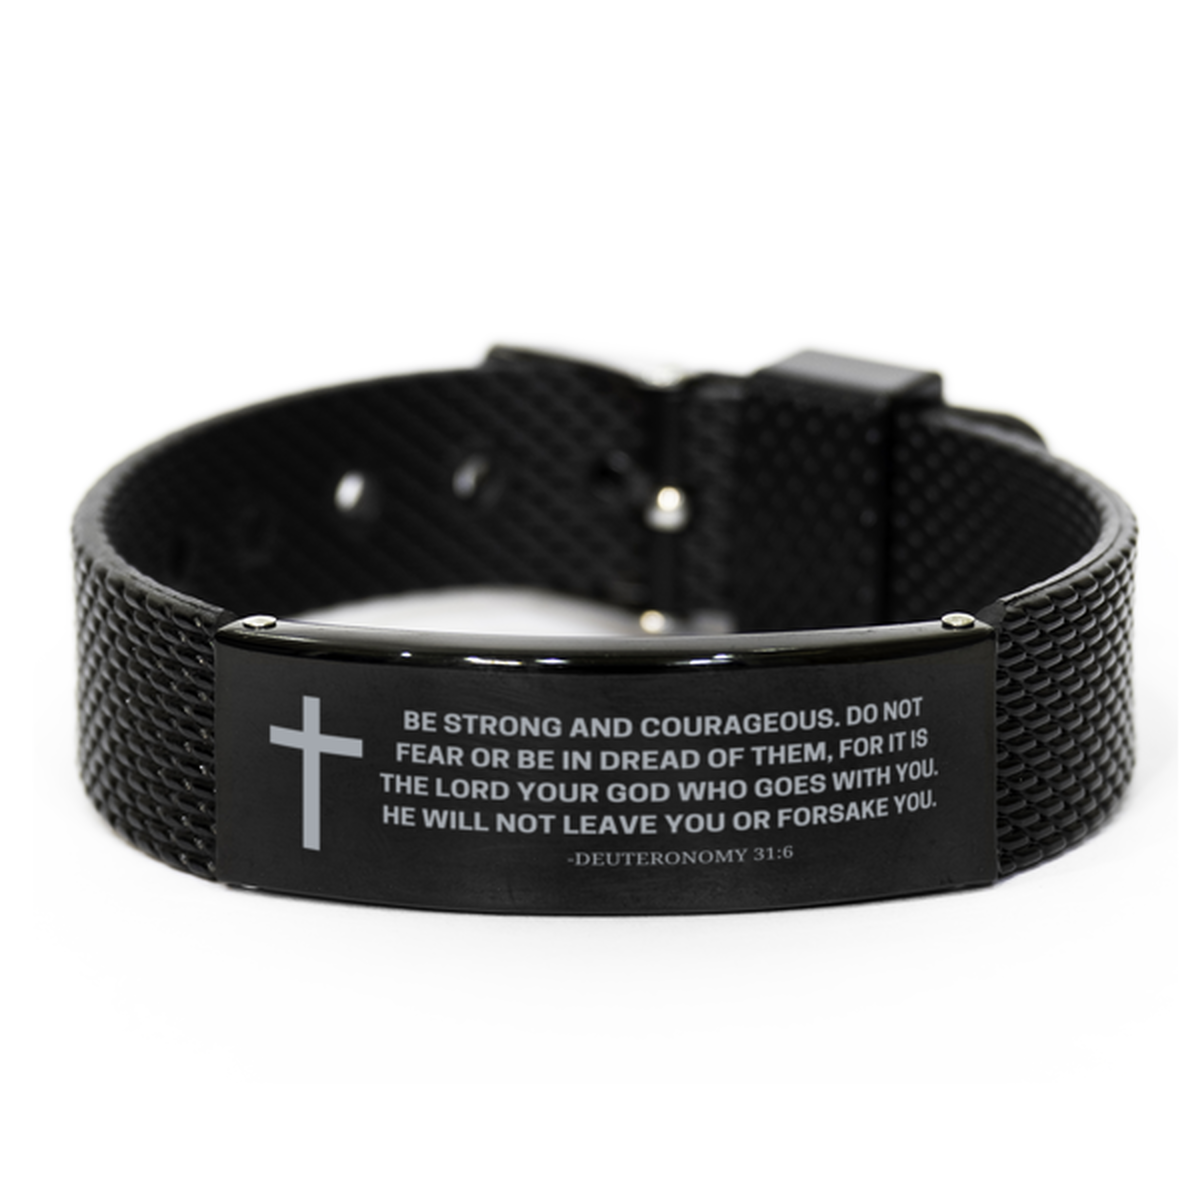 Baptism Gifts For Teenage Boys Girls, Christian Bible Verse Black Shark Mesh Bracelet, Be strong and courageous, Catholic Confirmation Gifts for Son, Godson, Grandson, Nephew